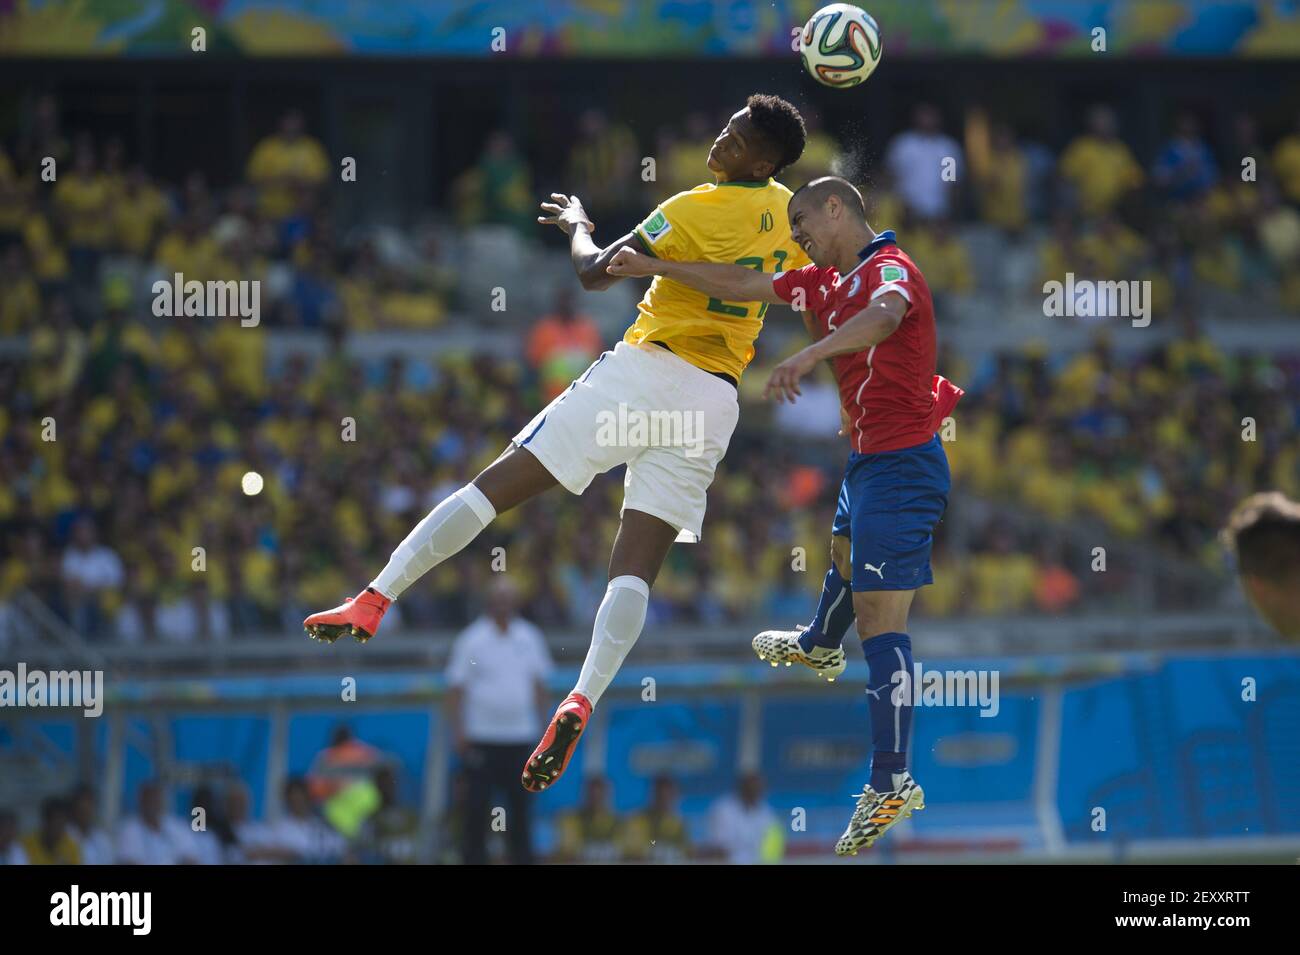 Brazil's JO (L) heads the ball with Chile's FRANCISCO SILVA GAJARDO (R) during the Round of 16 of the 2014 FIFA World Cup soccer match between Brazil and Chile, in Mineirao Stadium in Belo Horizonte, Brazil, on June 28, 2014. Photo by Jorge Martinez/MEXSPORT/Fotoarena/Sipa USA Stock Photo